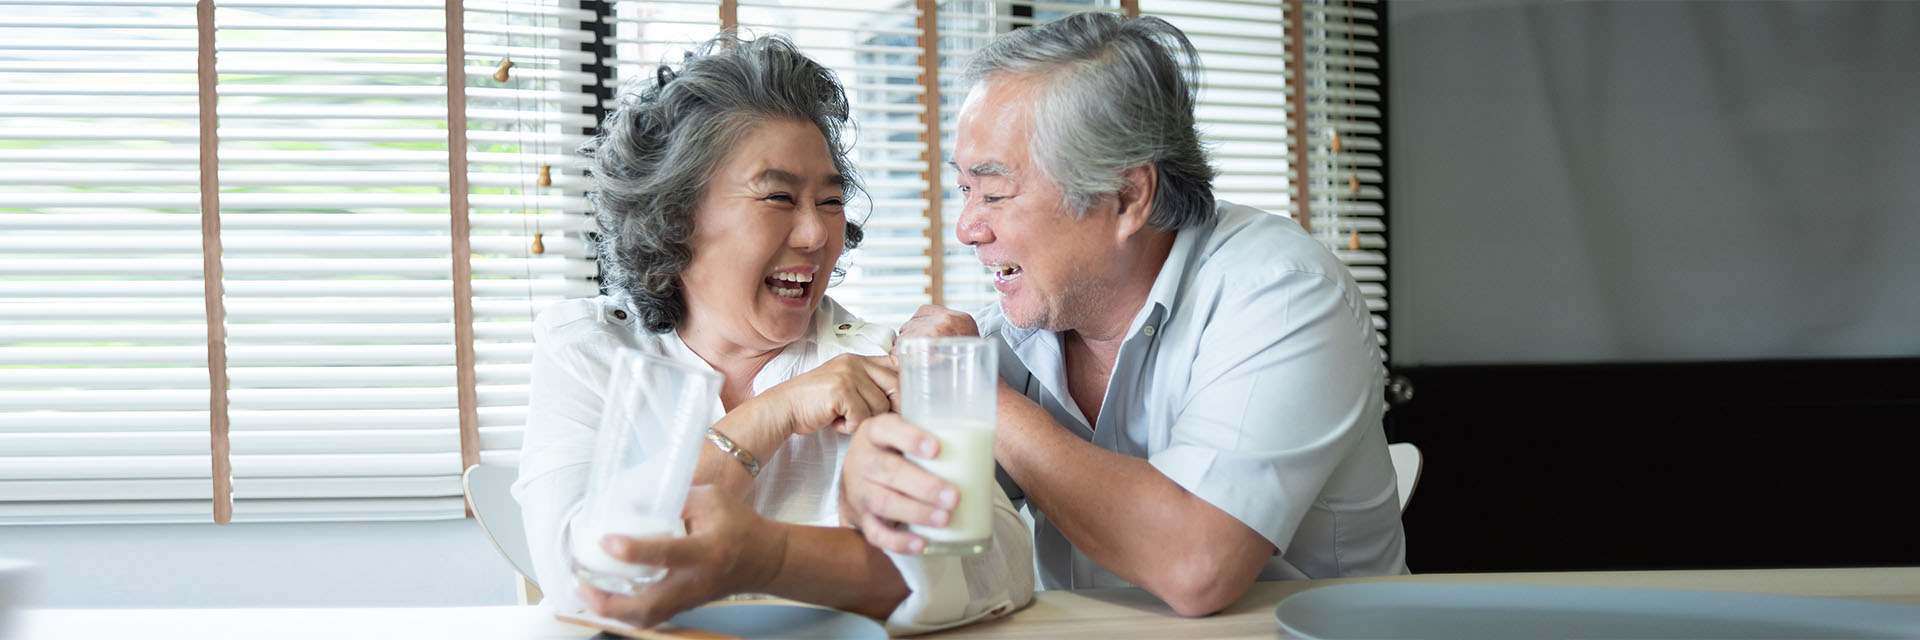 Mature couple having a glass of milk at a table